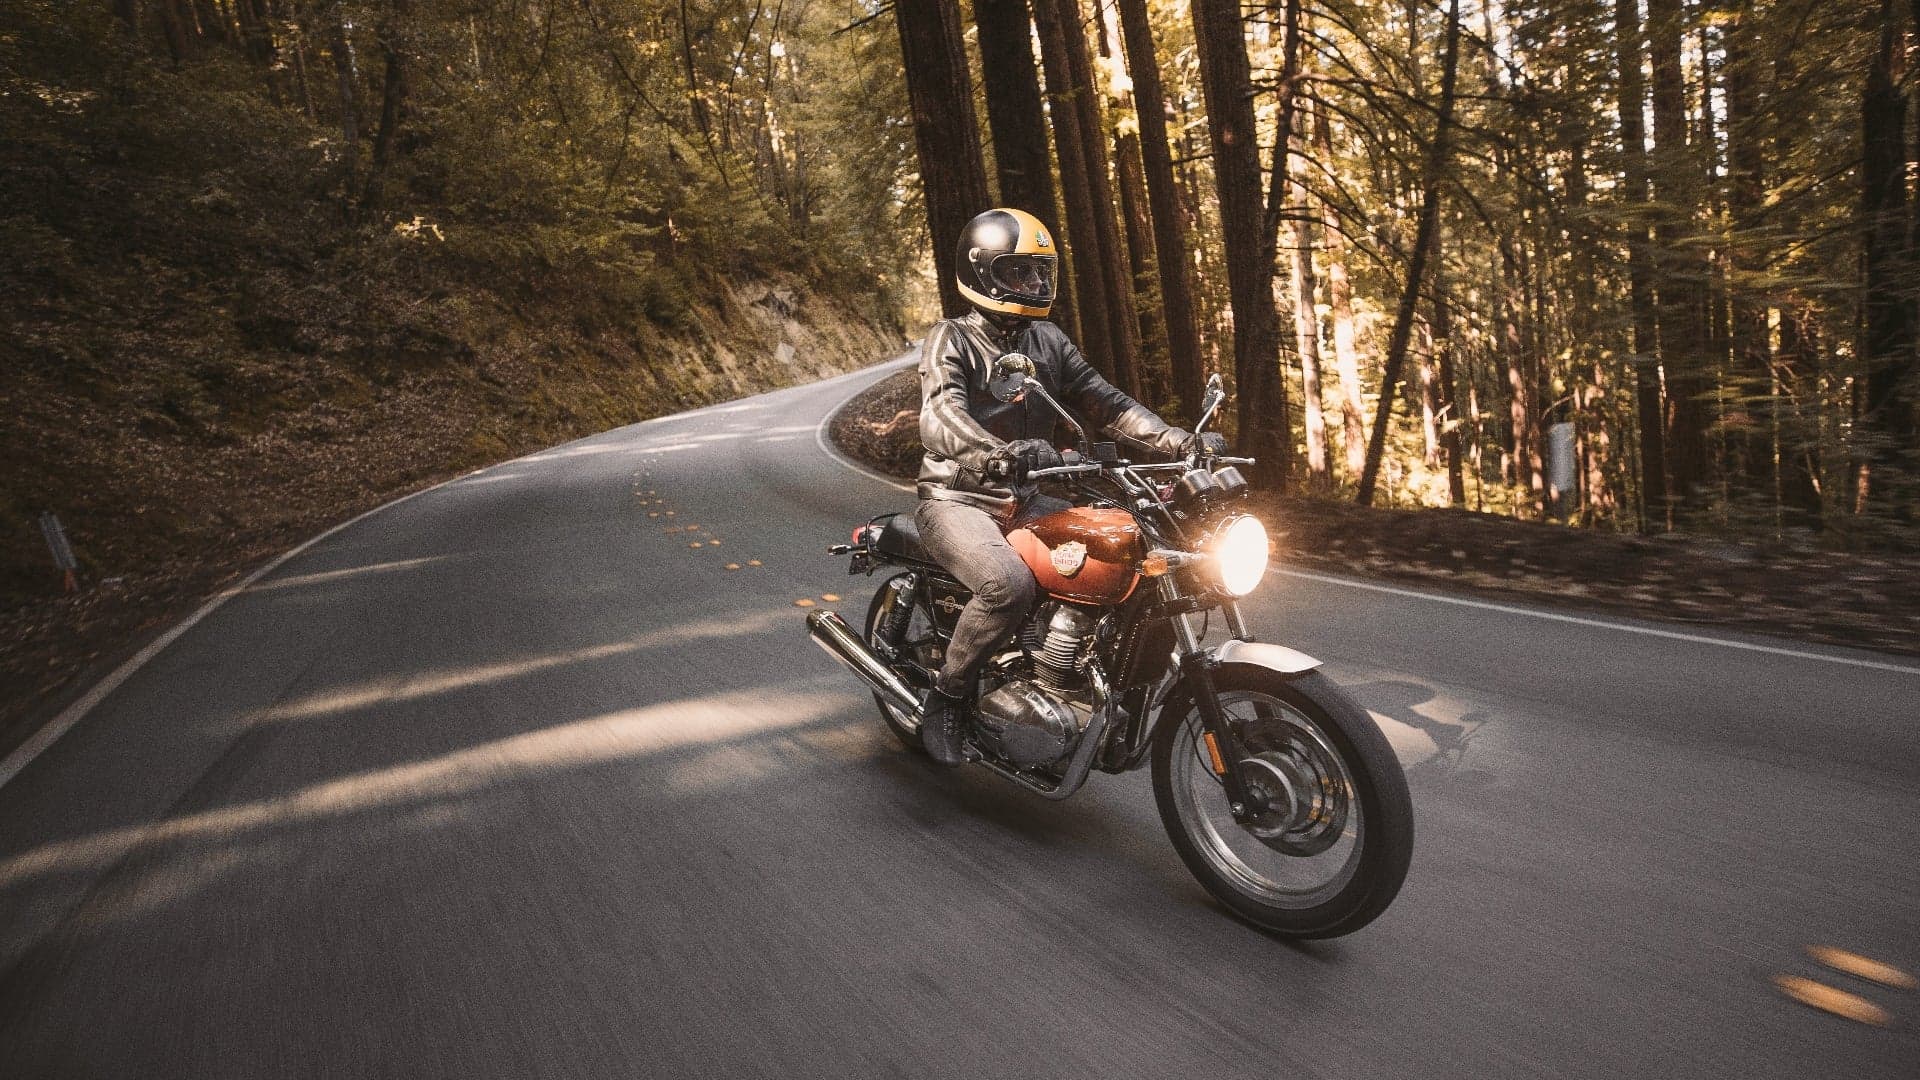 2019 Royal Enfield Twins Review: Pure Fun on an Honest, Approachable Middleweight Moto